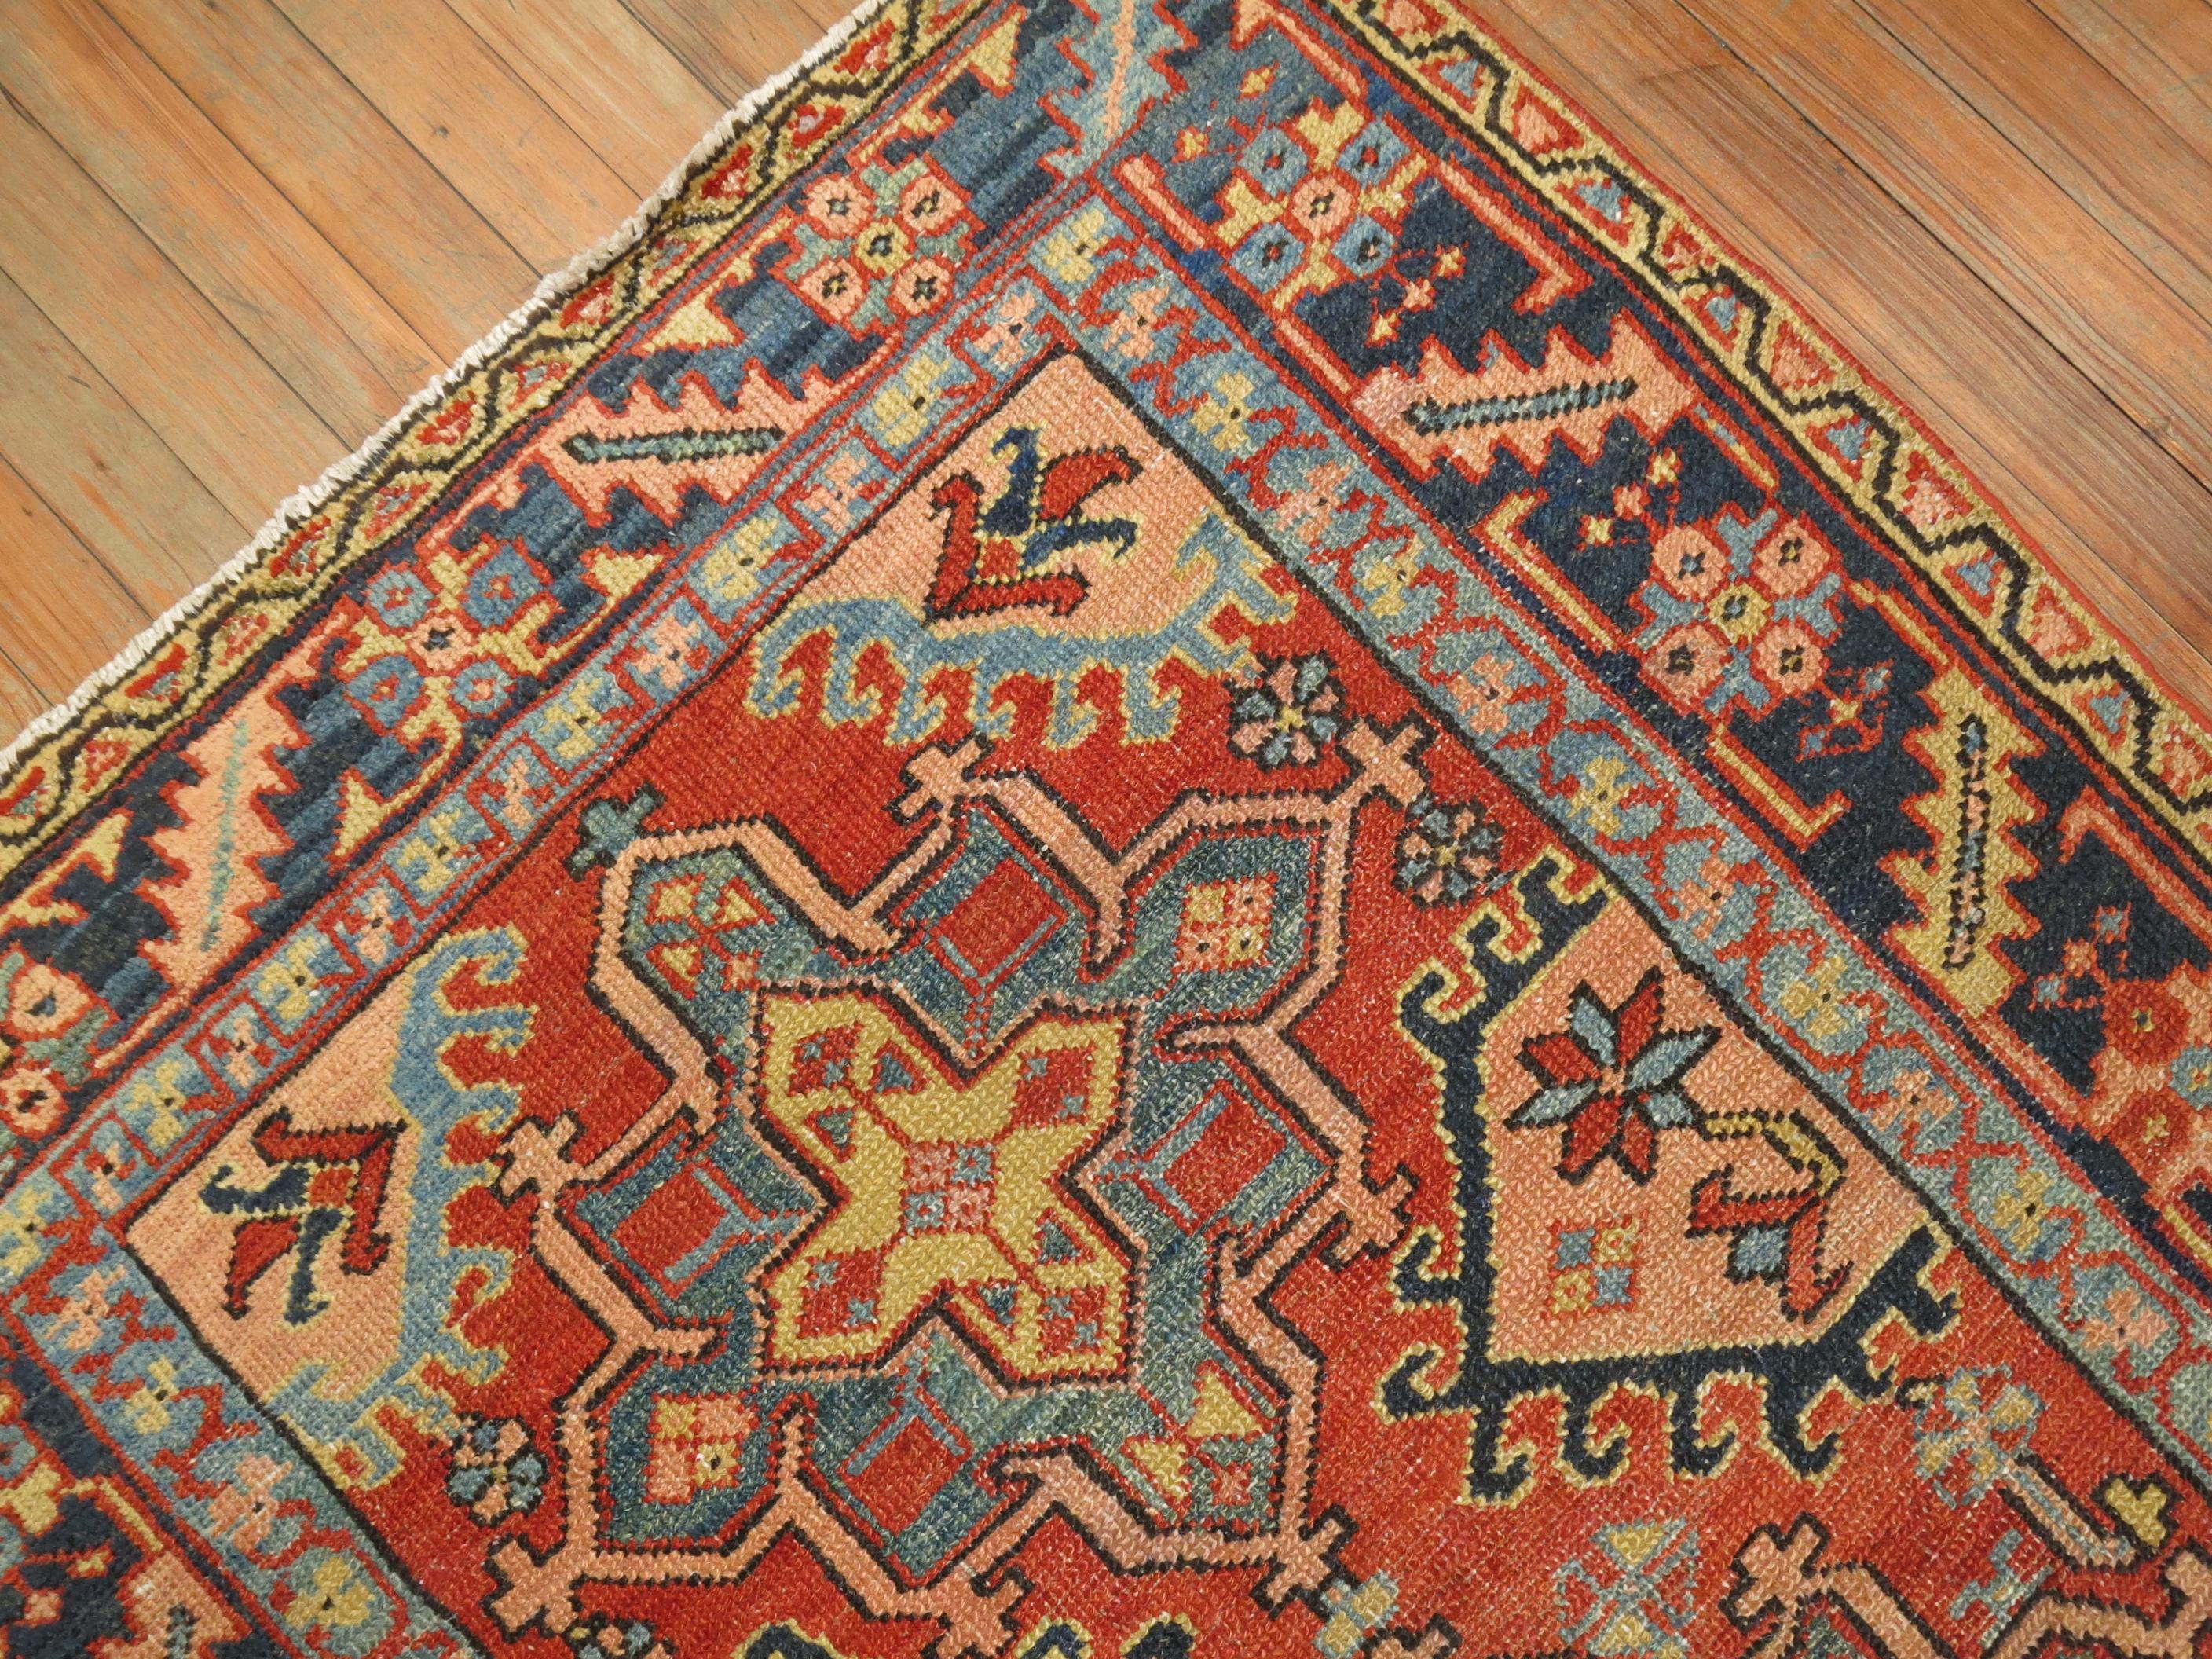 Tribal Traditional Rustic Persian Heriz Scatter Rug, Early 20th Century